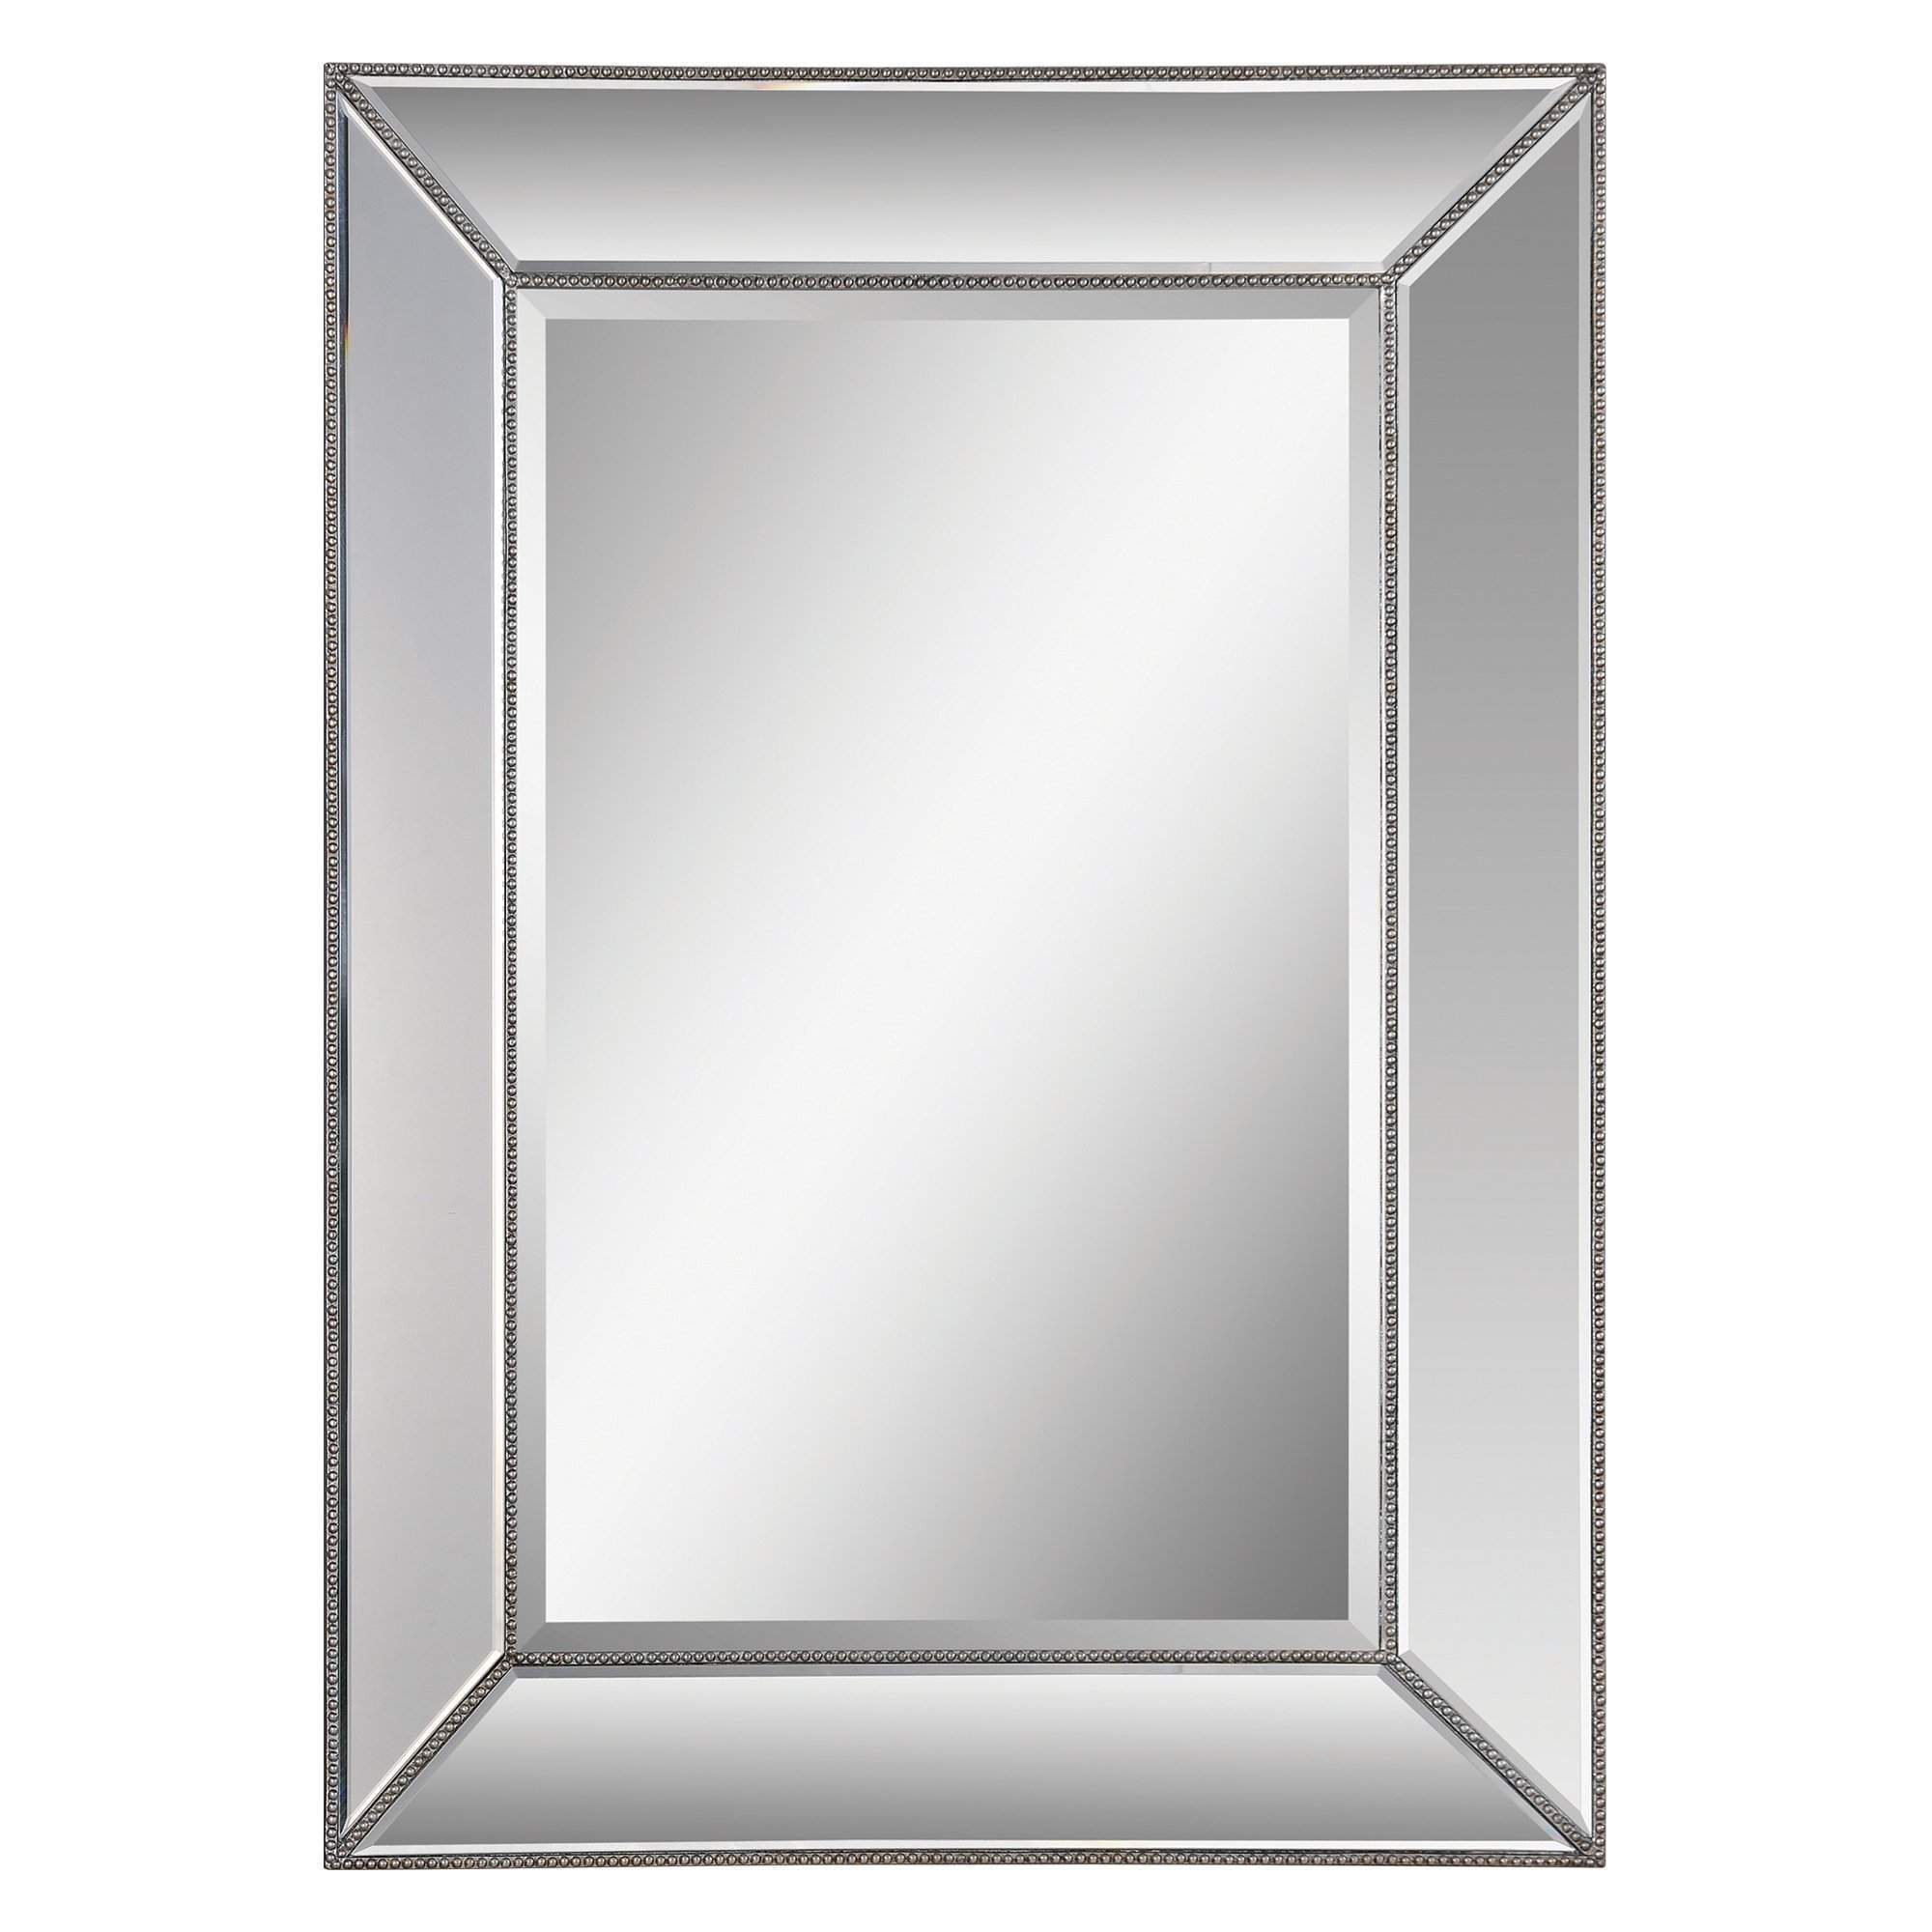 Renwil Whitney Mirror 46" X 34" – Mt1121 | Products | Mirror With Regard To Lake Park Beveled Beaded Accent Wall Mirrors (View 14 of 30)